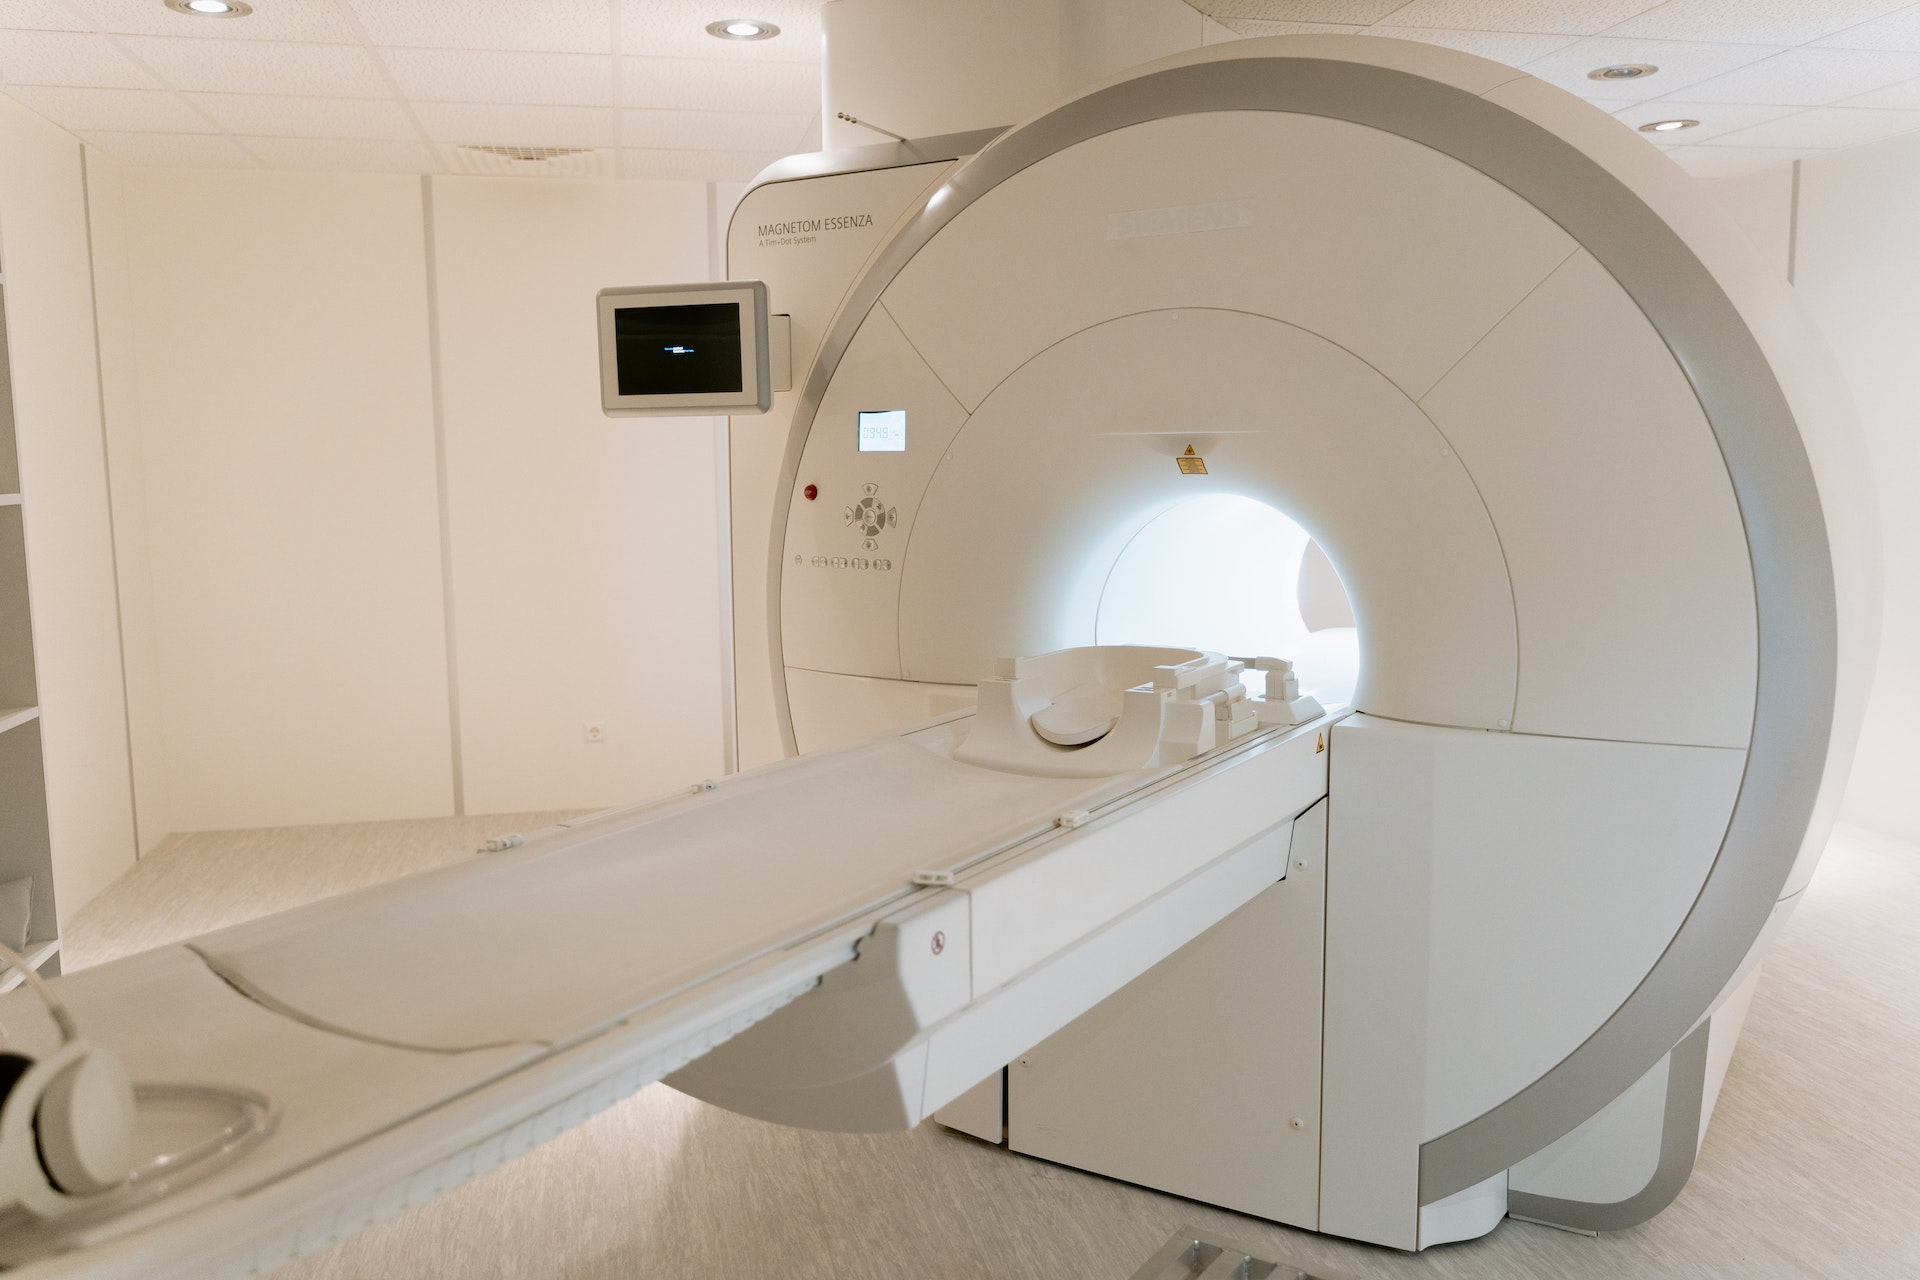 How CT Scan help in medical industry